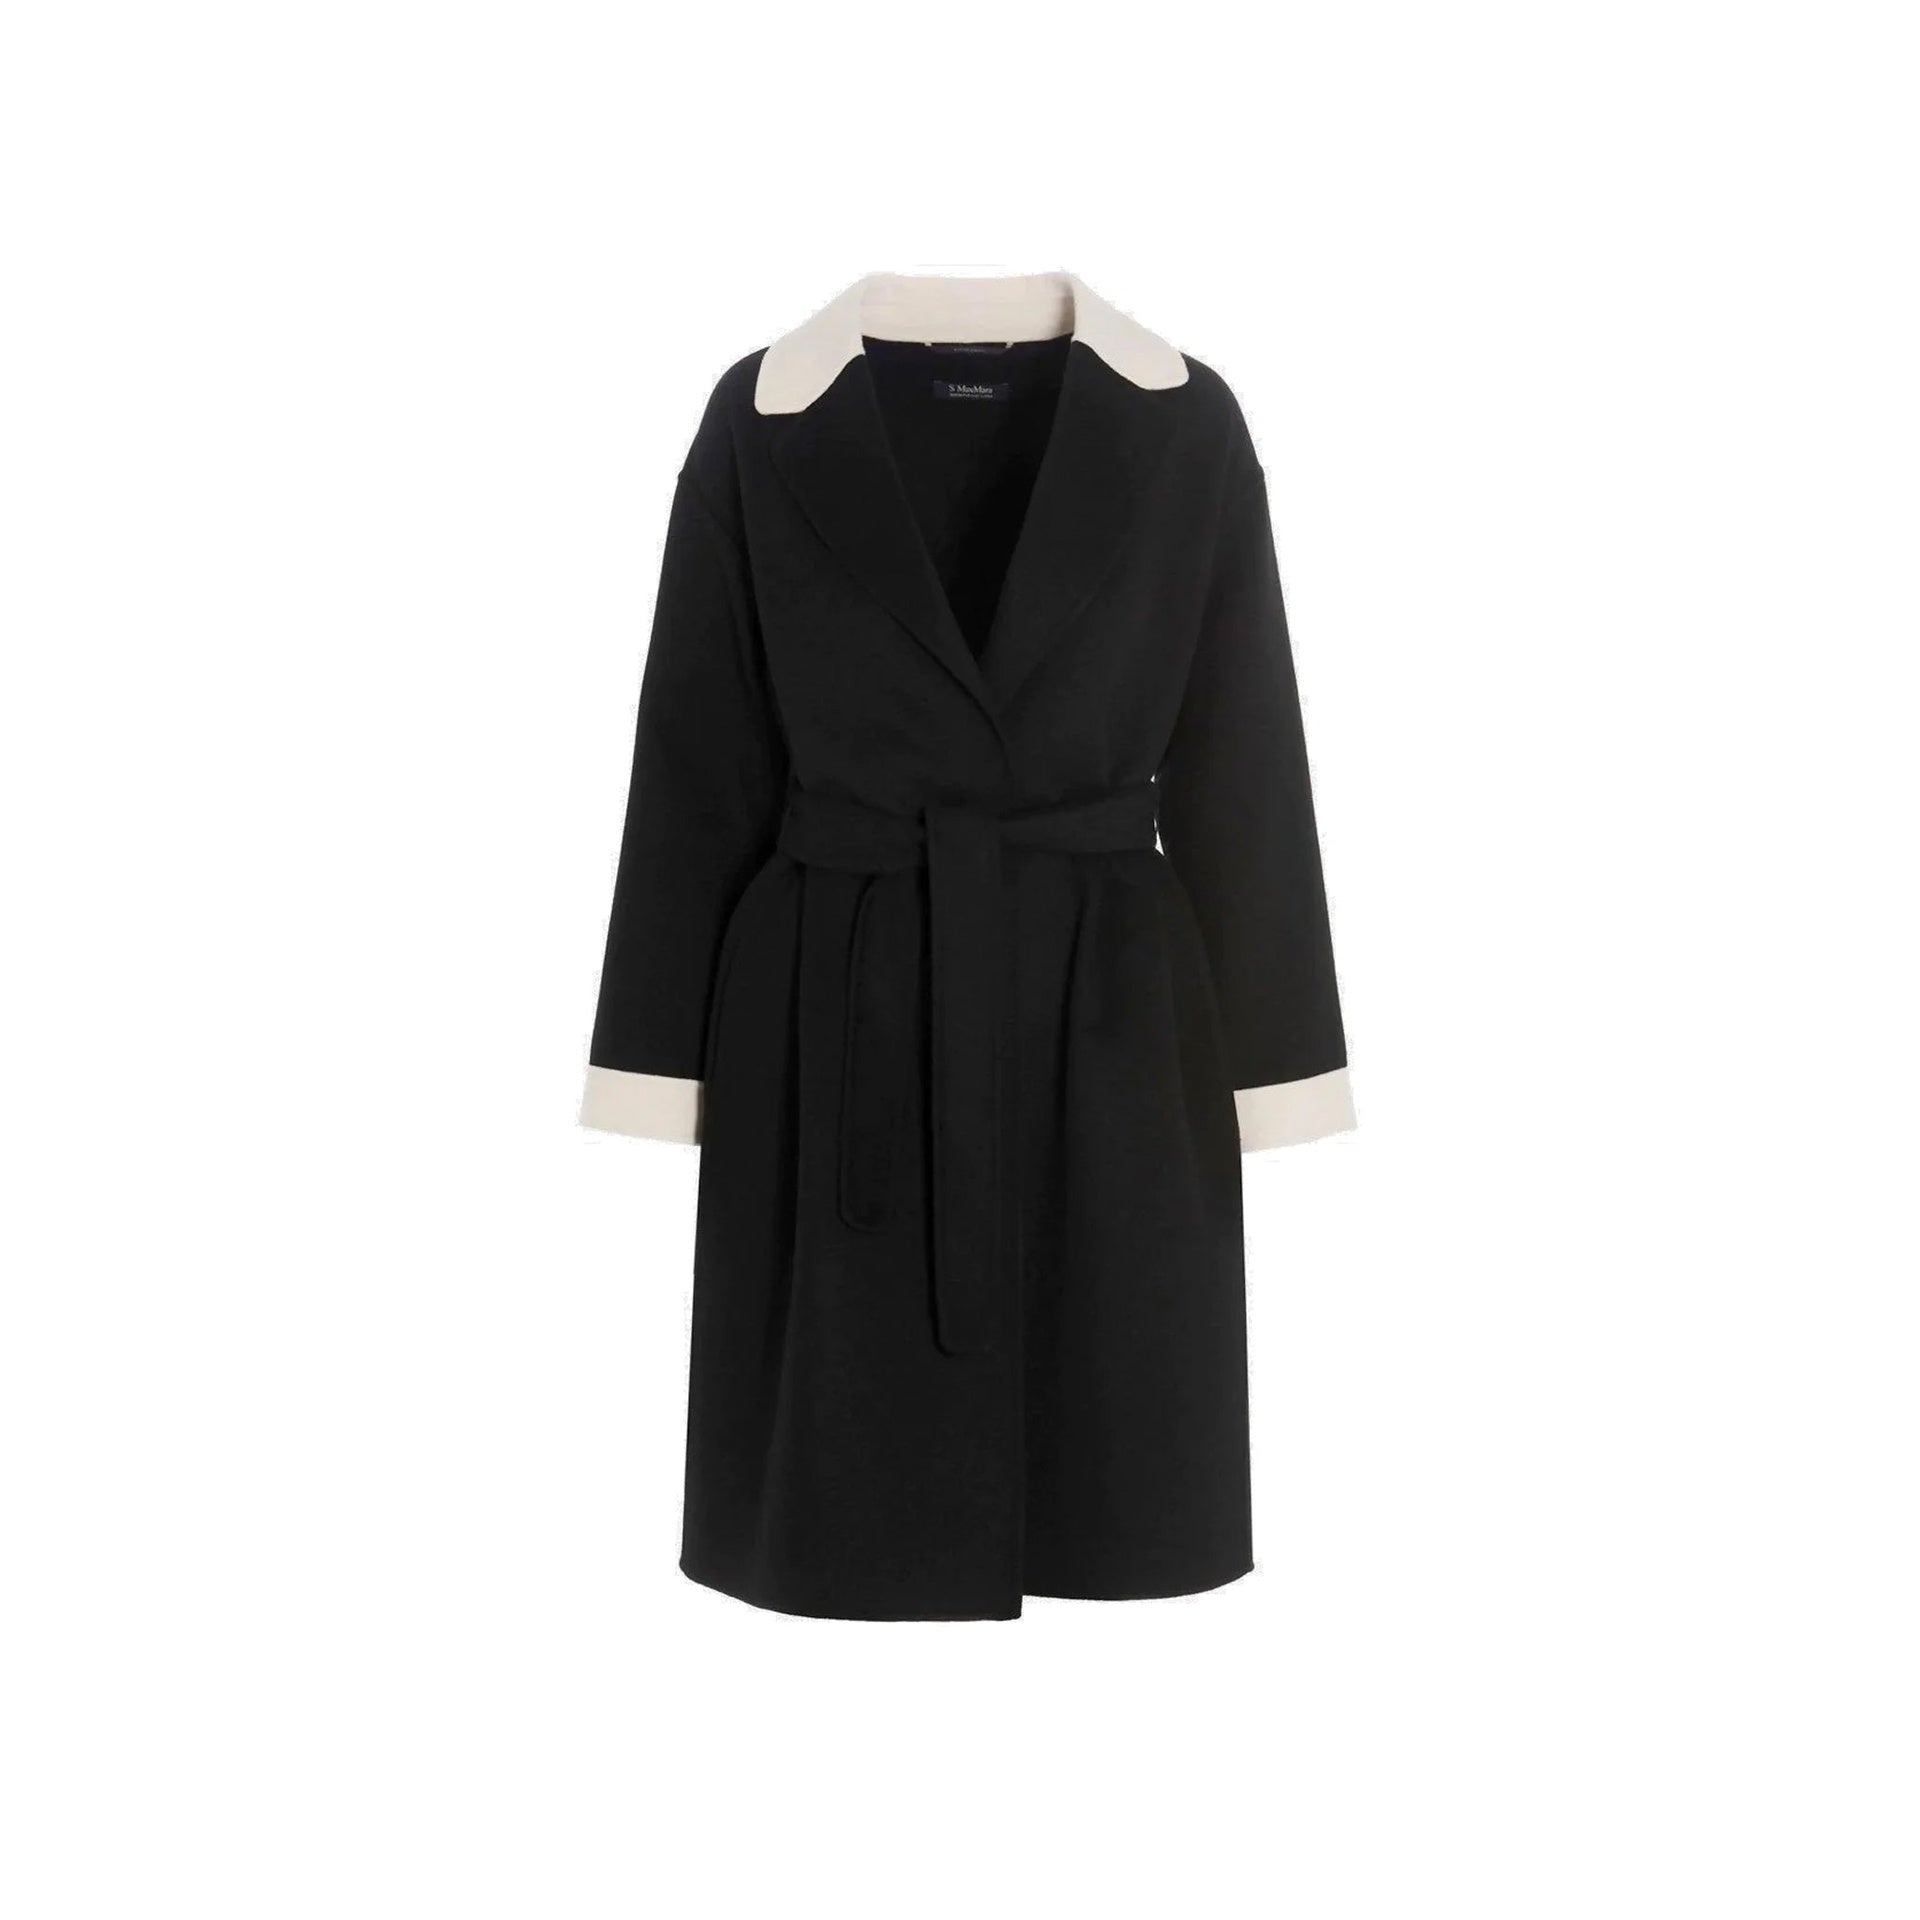 S-MAX-MARA-OUTLET-SALE-s-Max-Mara-Ada-Coat-WOMEN-CLOTHING-BLACK-38-ARCHIVE-COLLECTION.jpg